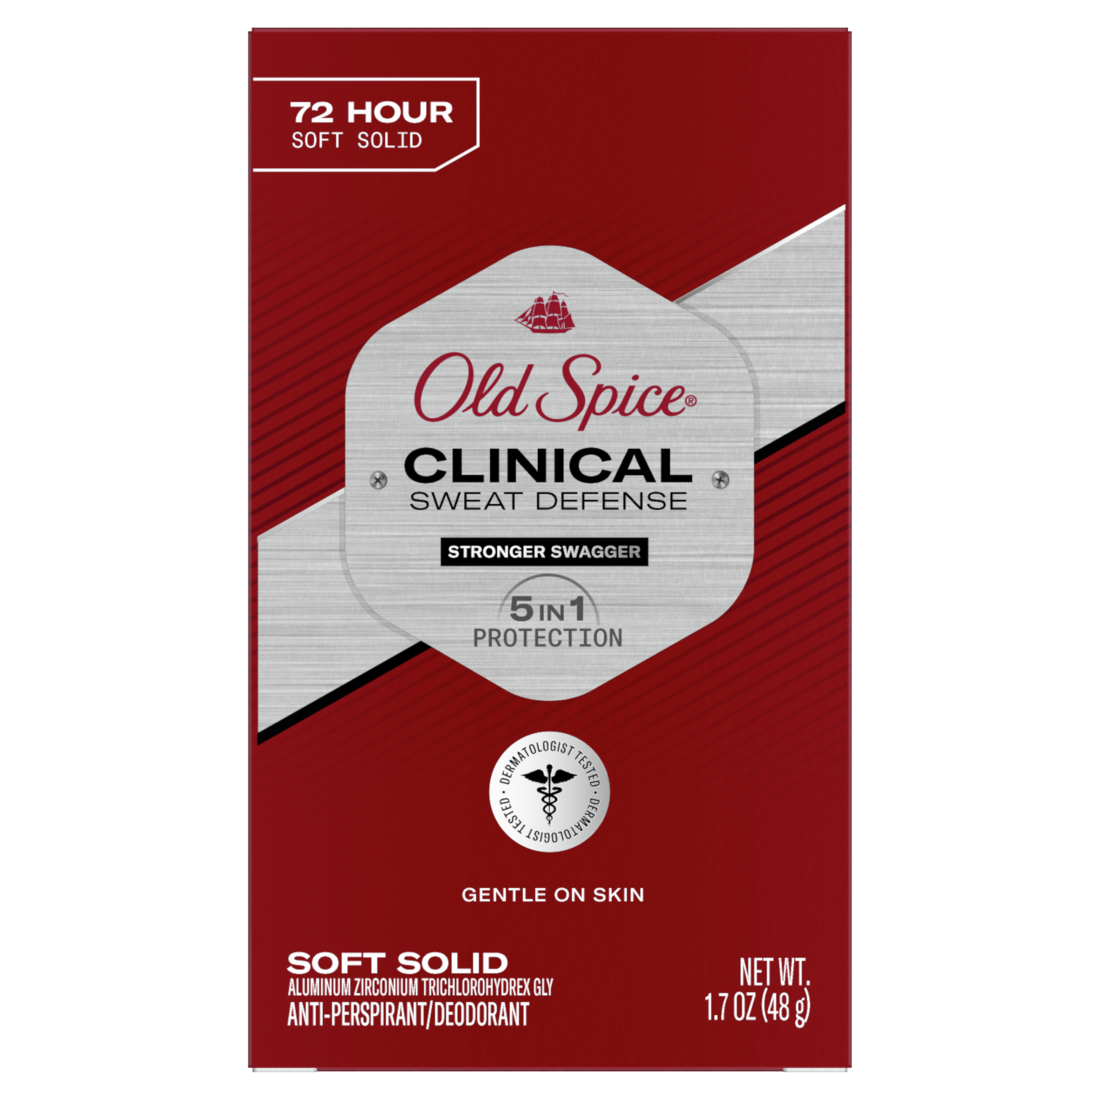 Old Spice Clinical Sweat Defense Anti-Perspirant Deo 72 Hour Stronger Swagger - 1.2oz/12pk